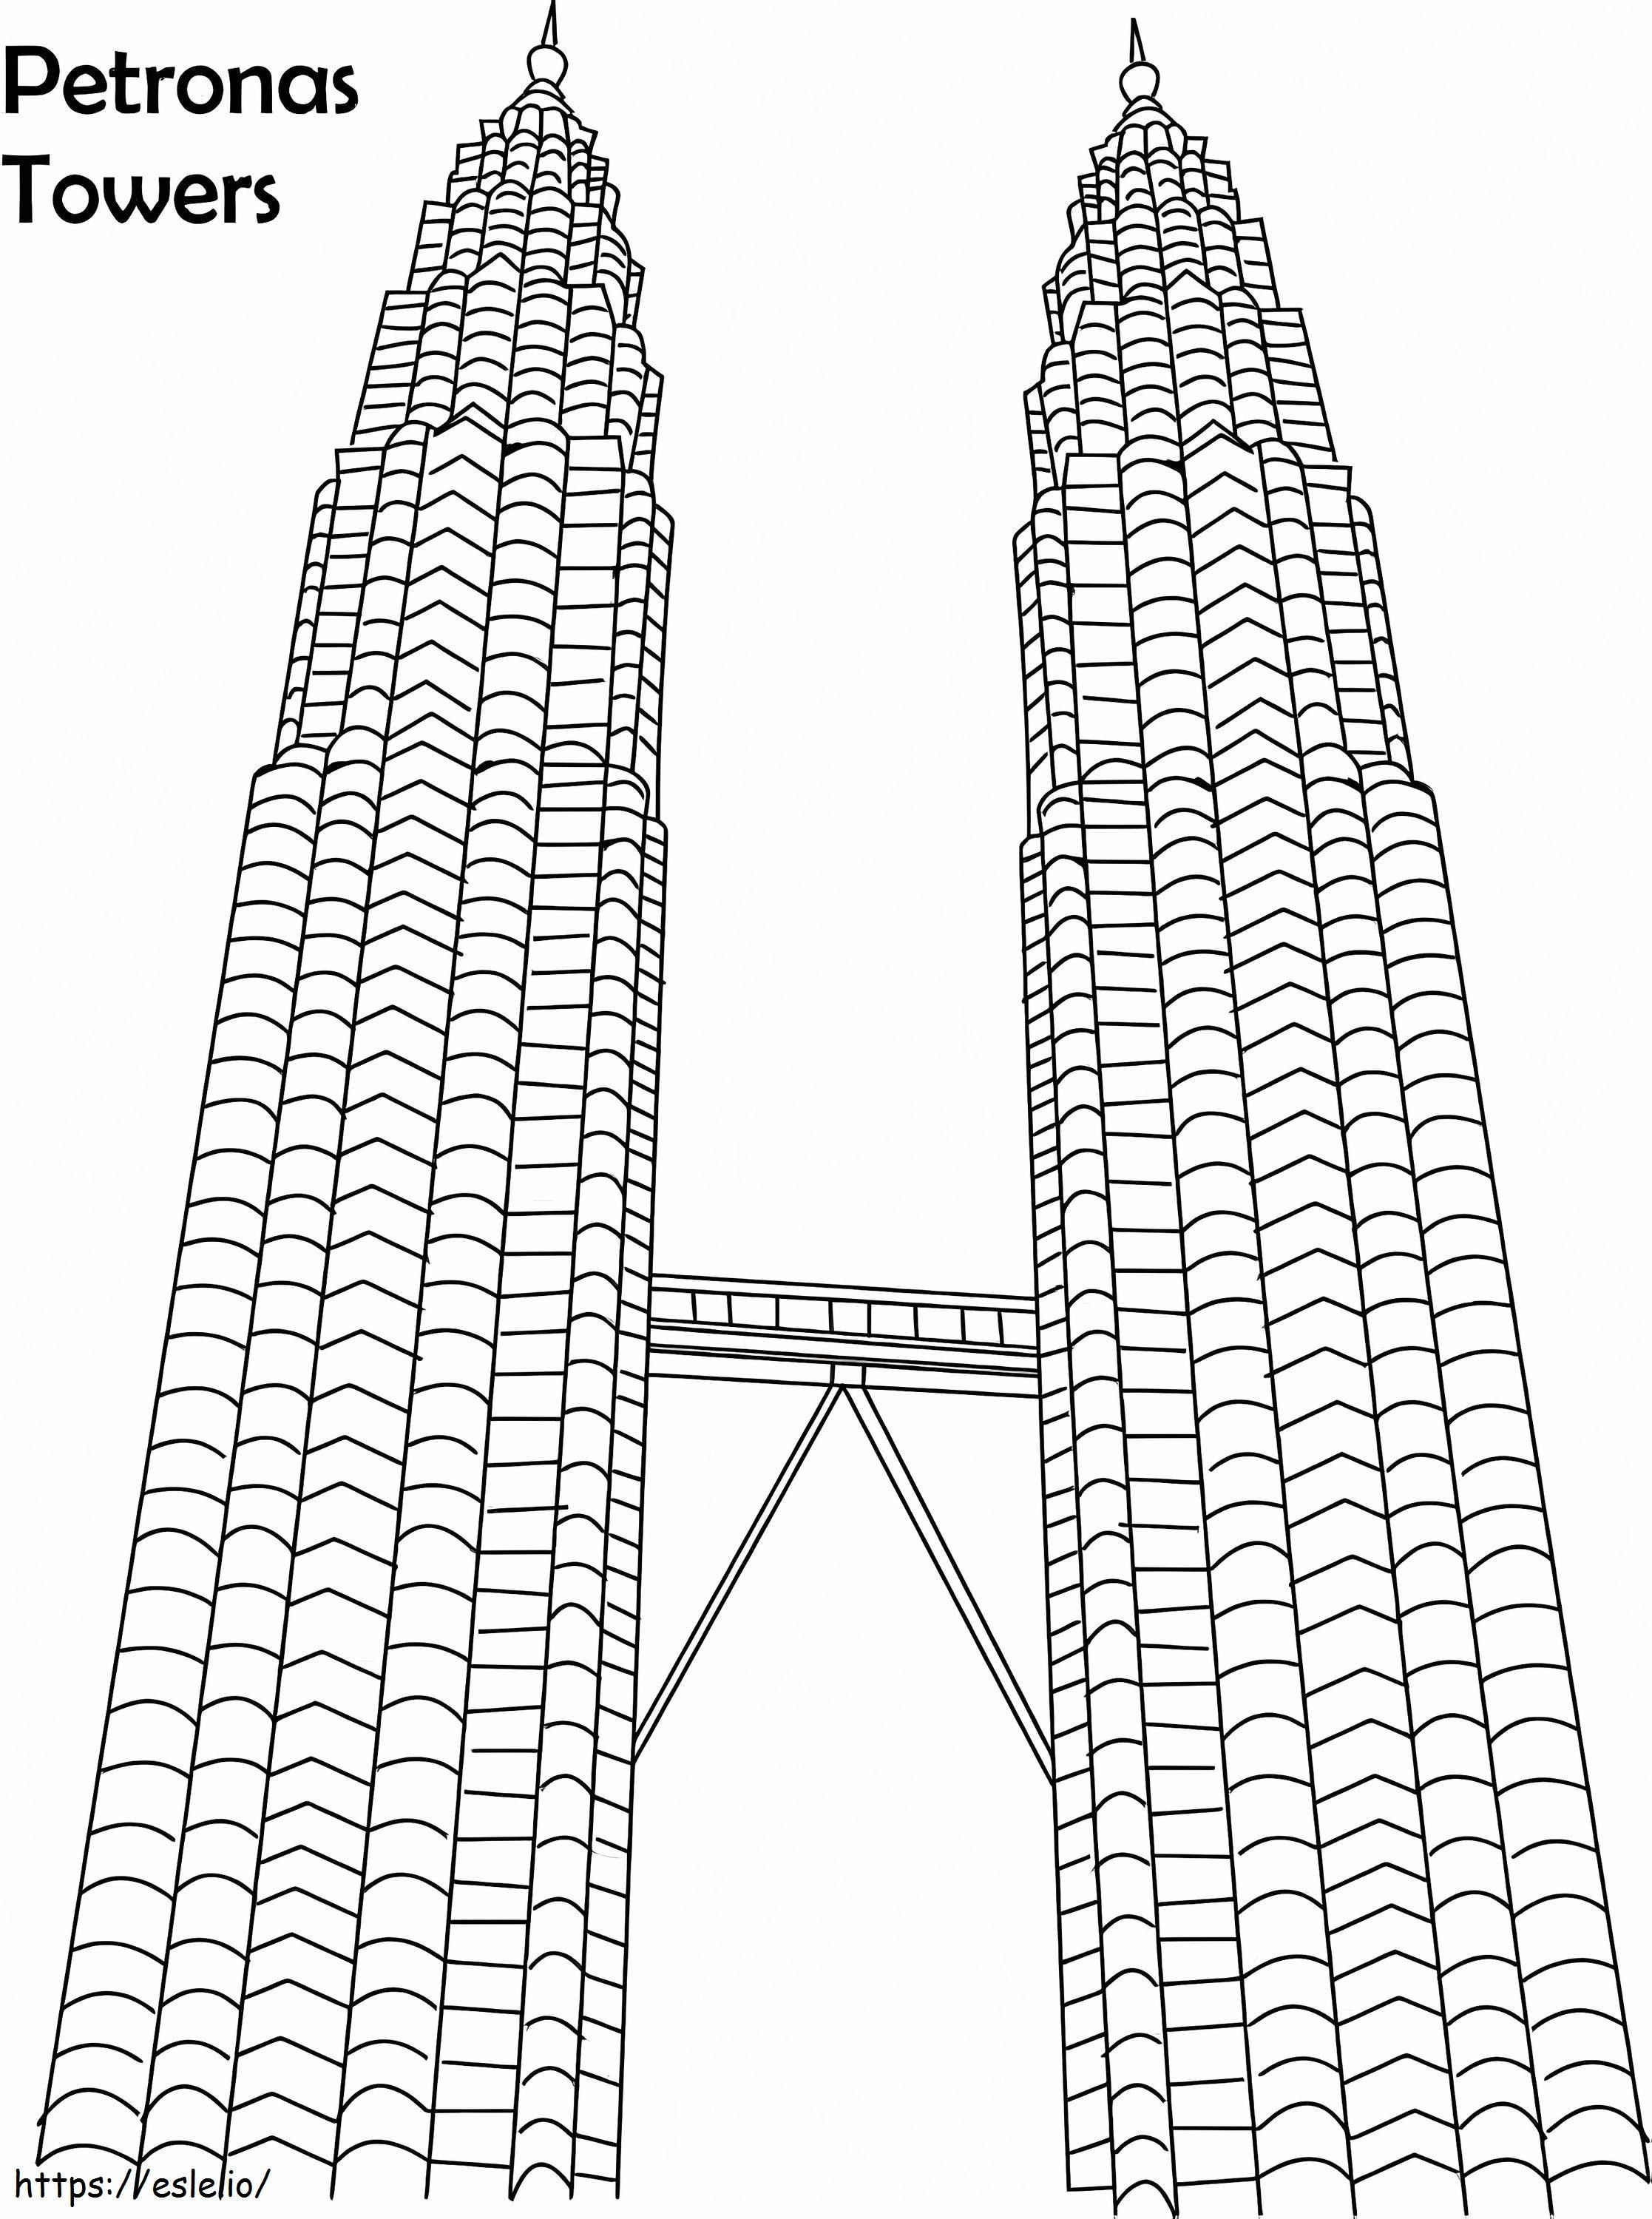 Petronas Twin Towers 1 1 coloring page